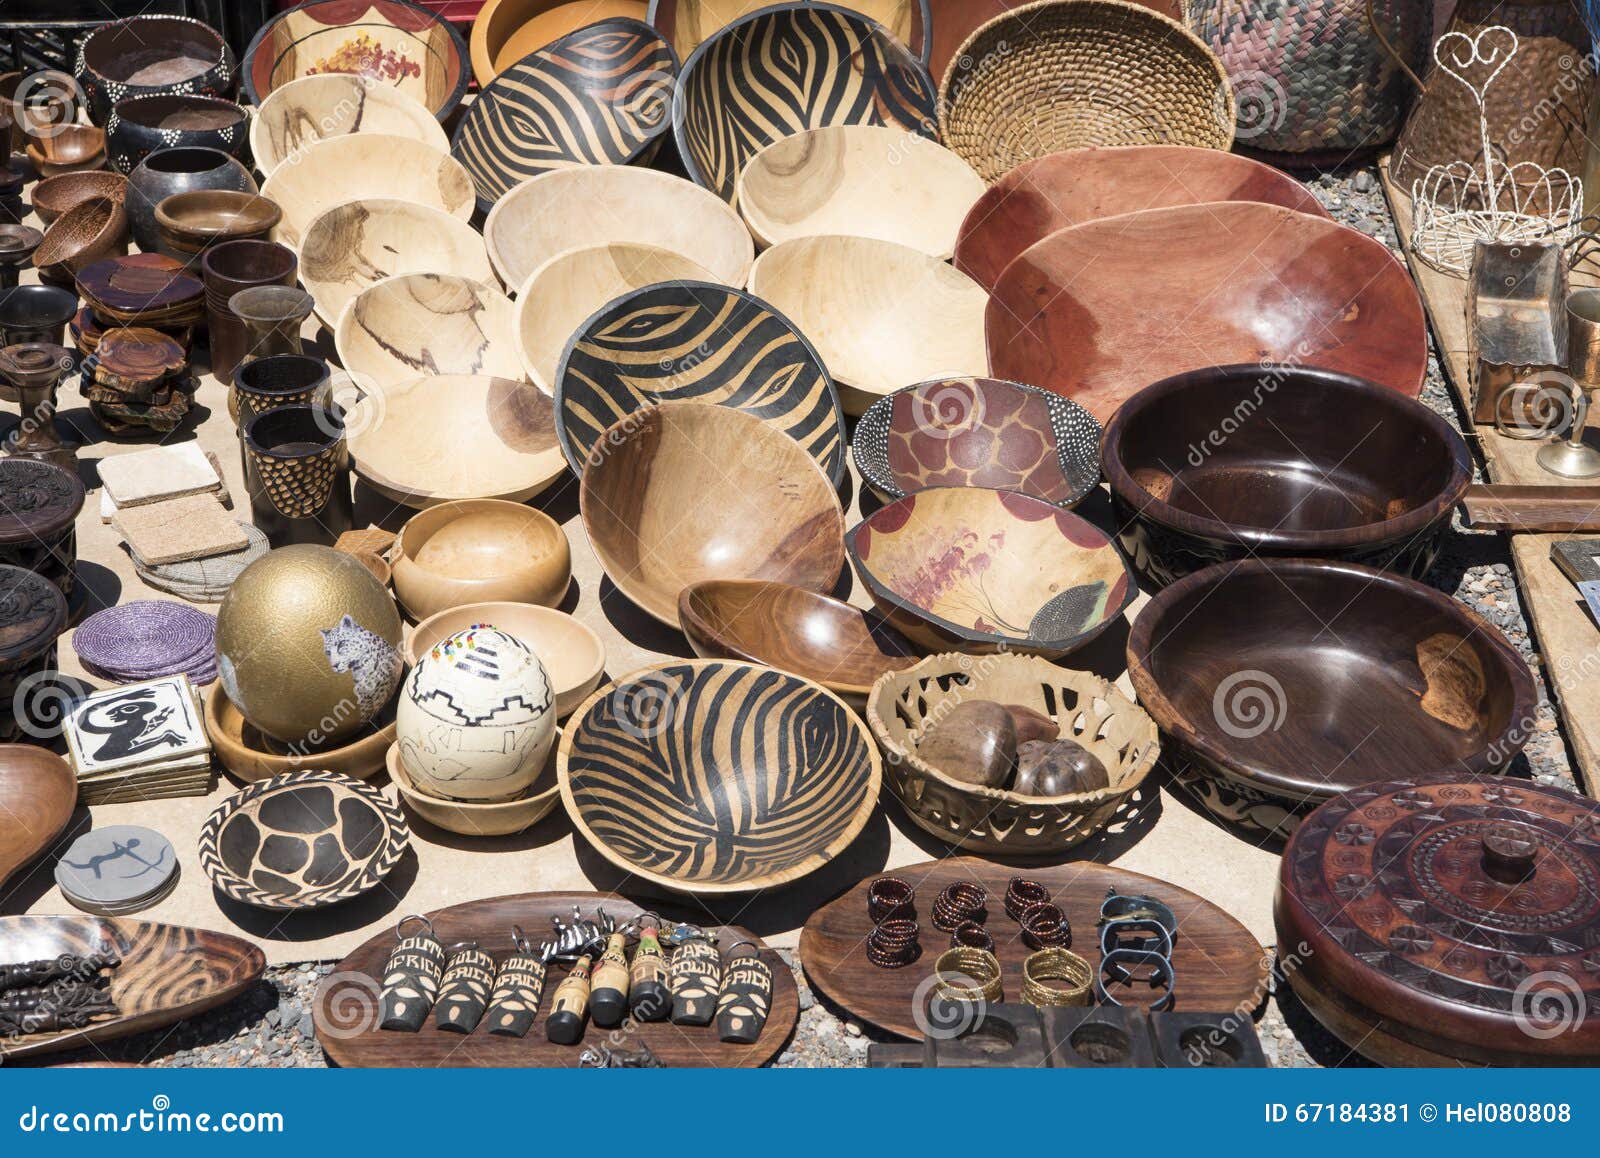 souvenirs south africa, handcrafted and painted bowls